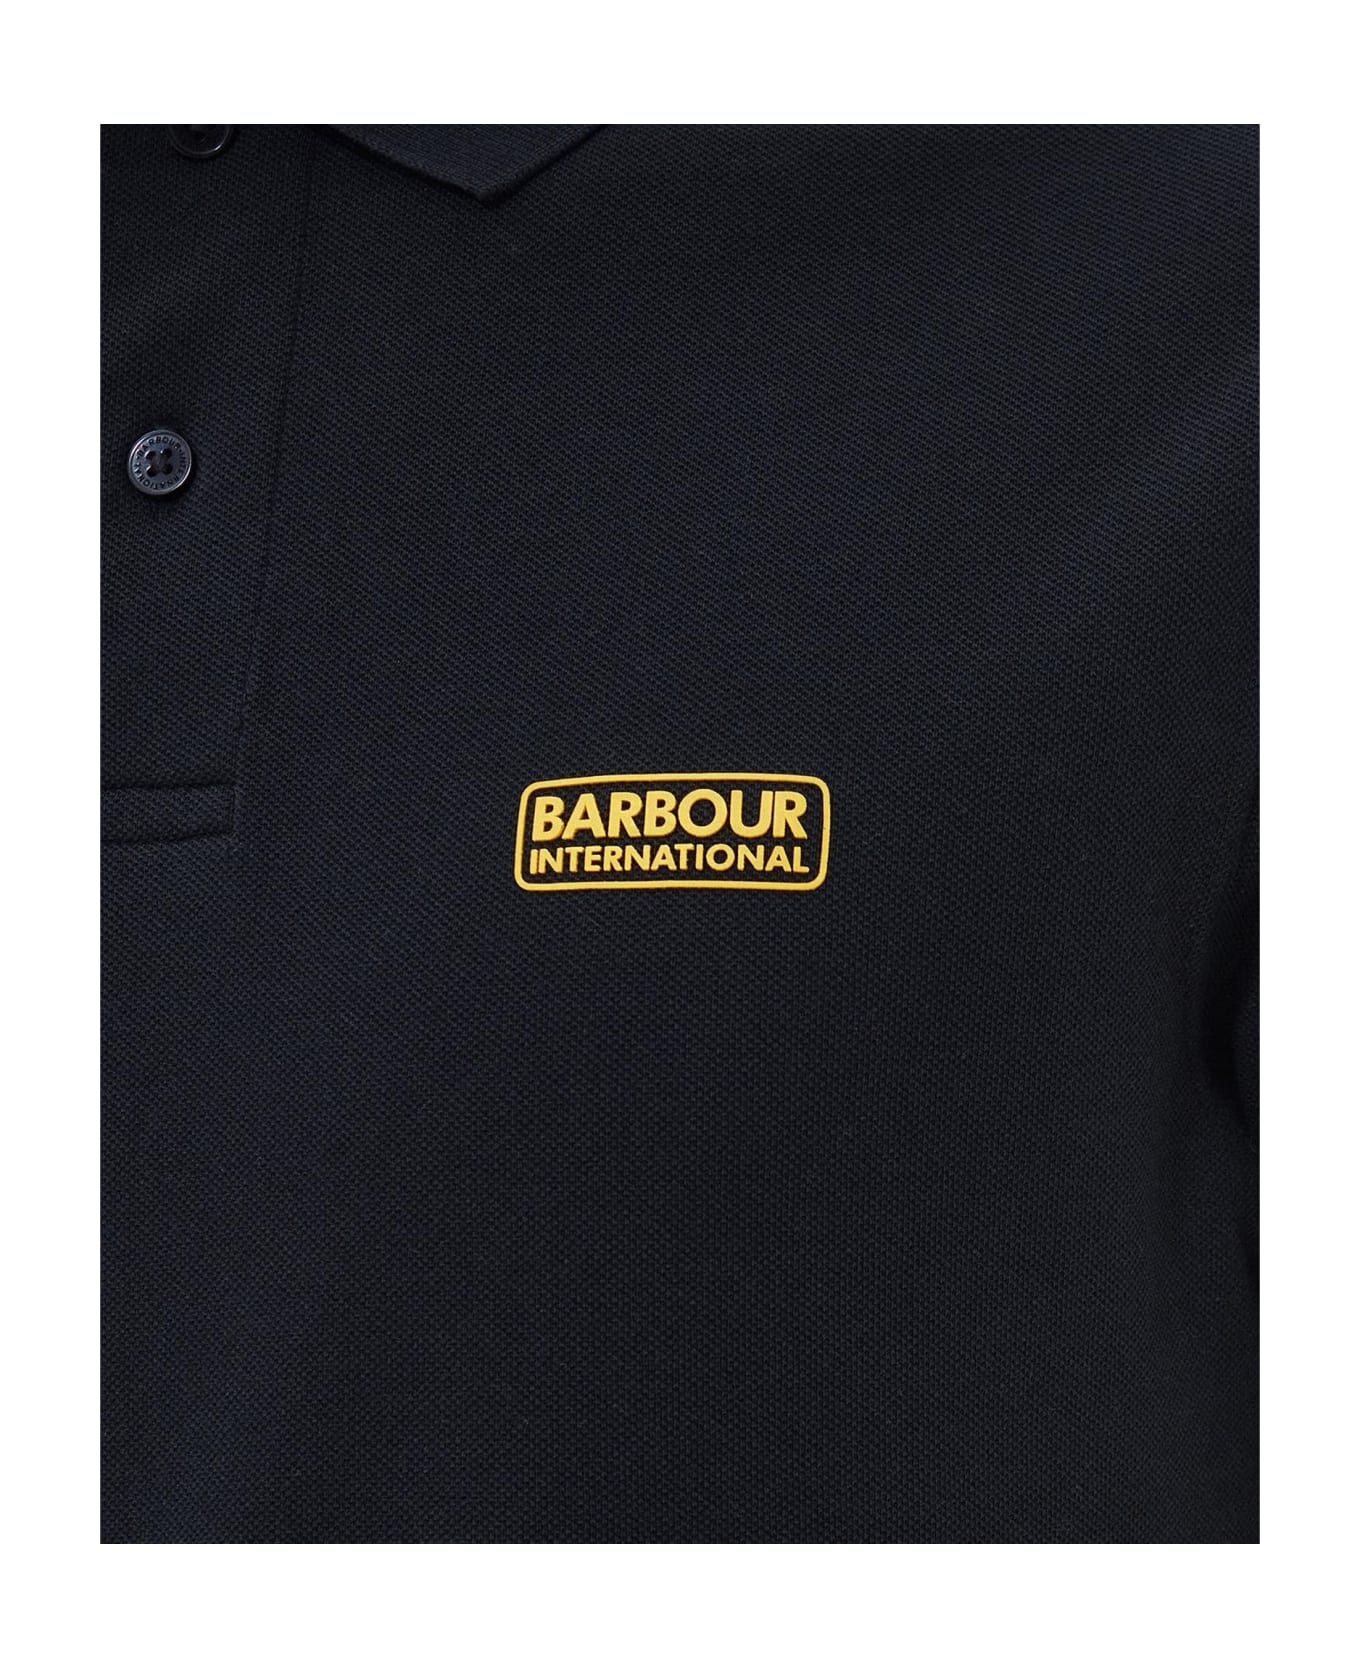 Barbour T-shirts And Polos Black - Black